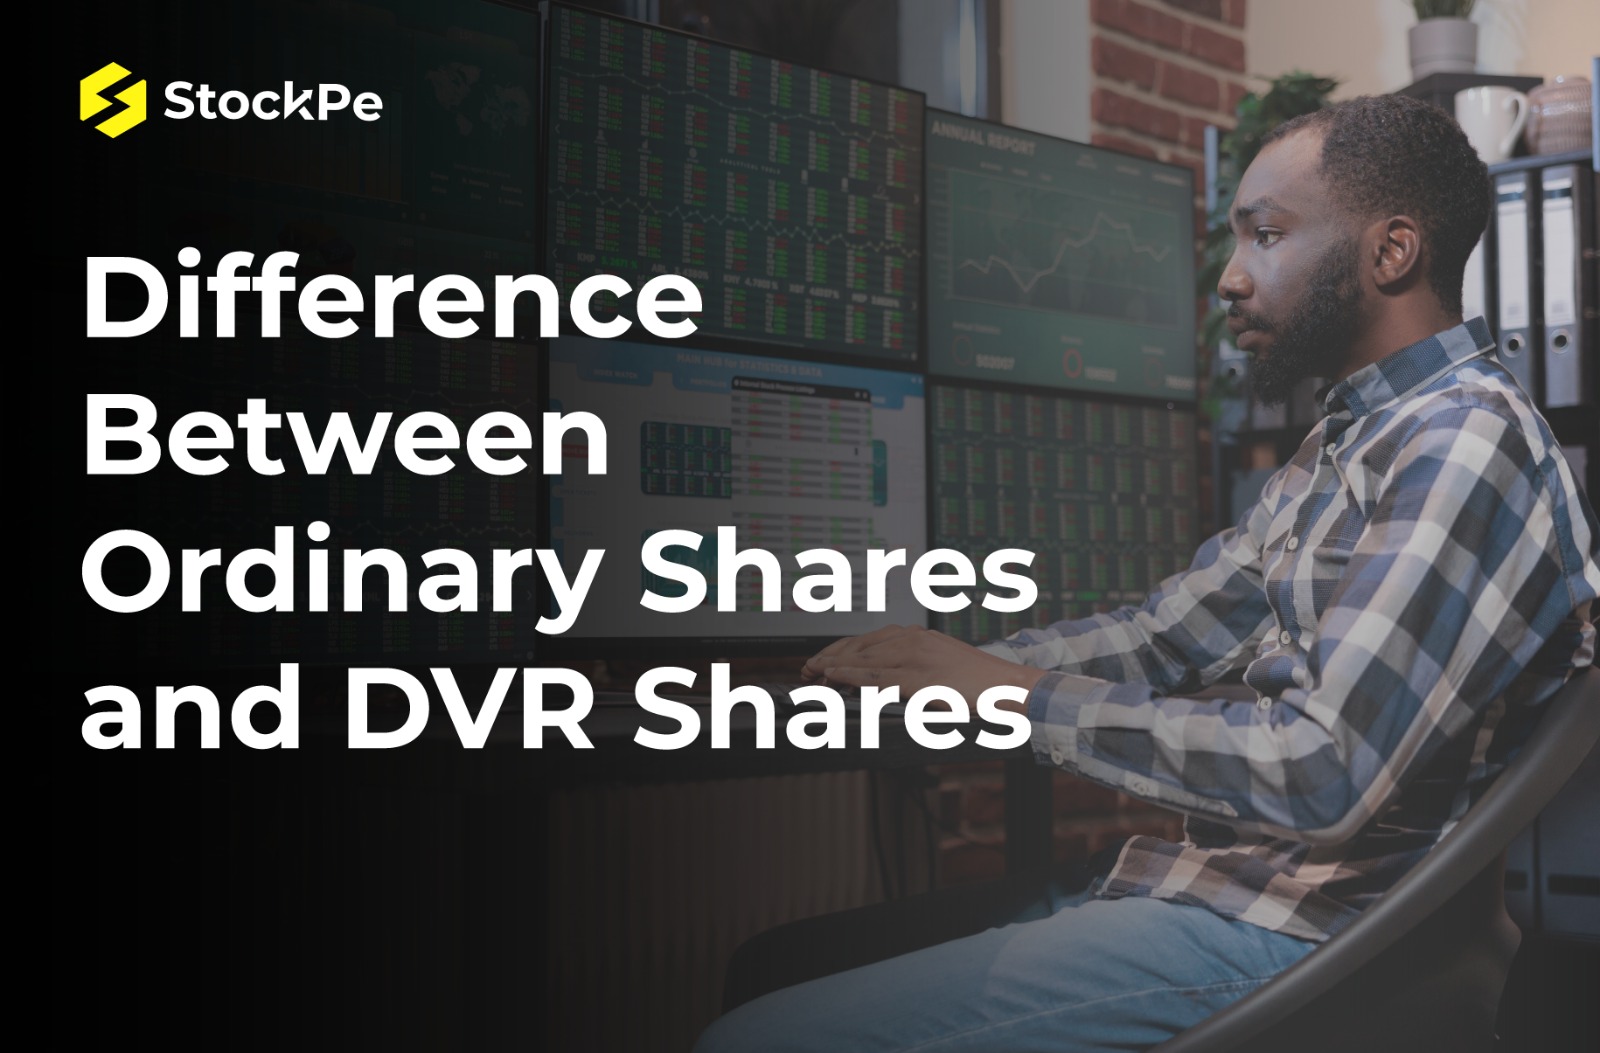 You are currently viewing Difference Between Ordinary Shares and DVR Shares